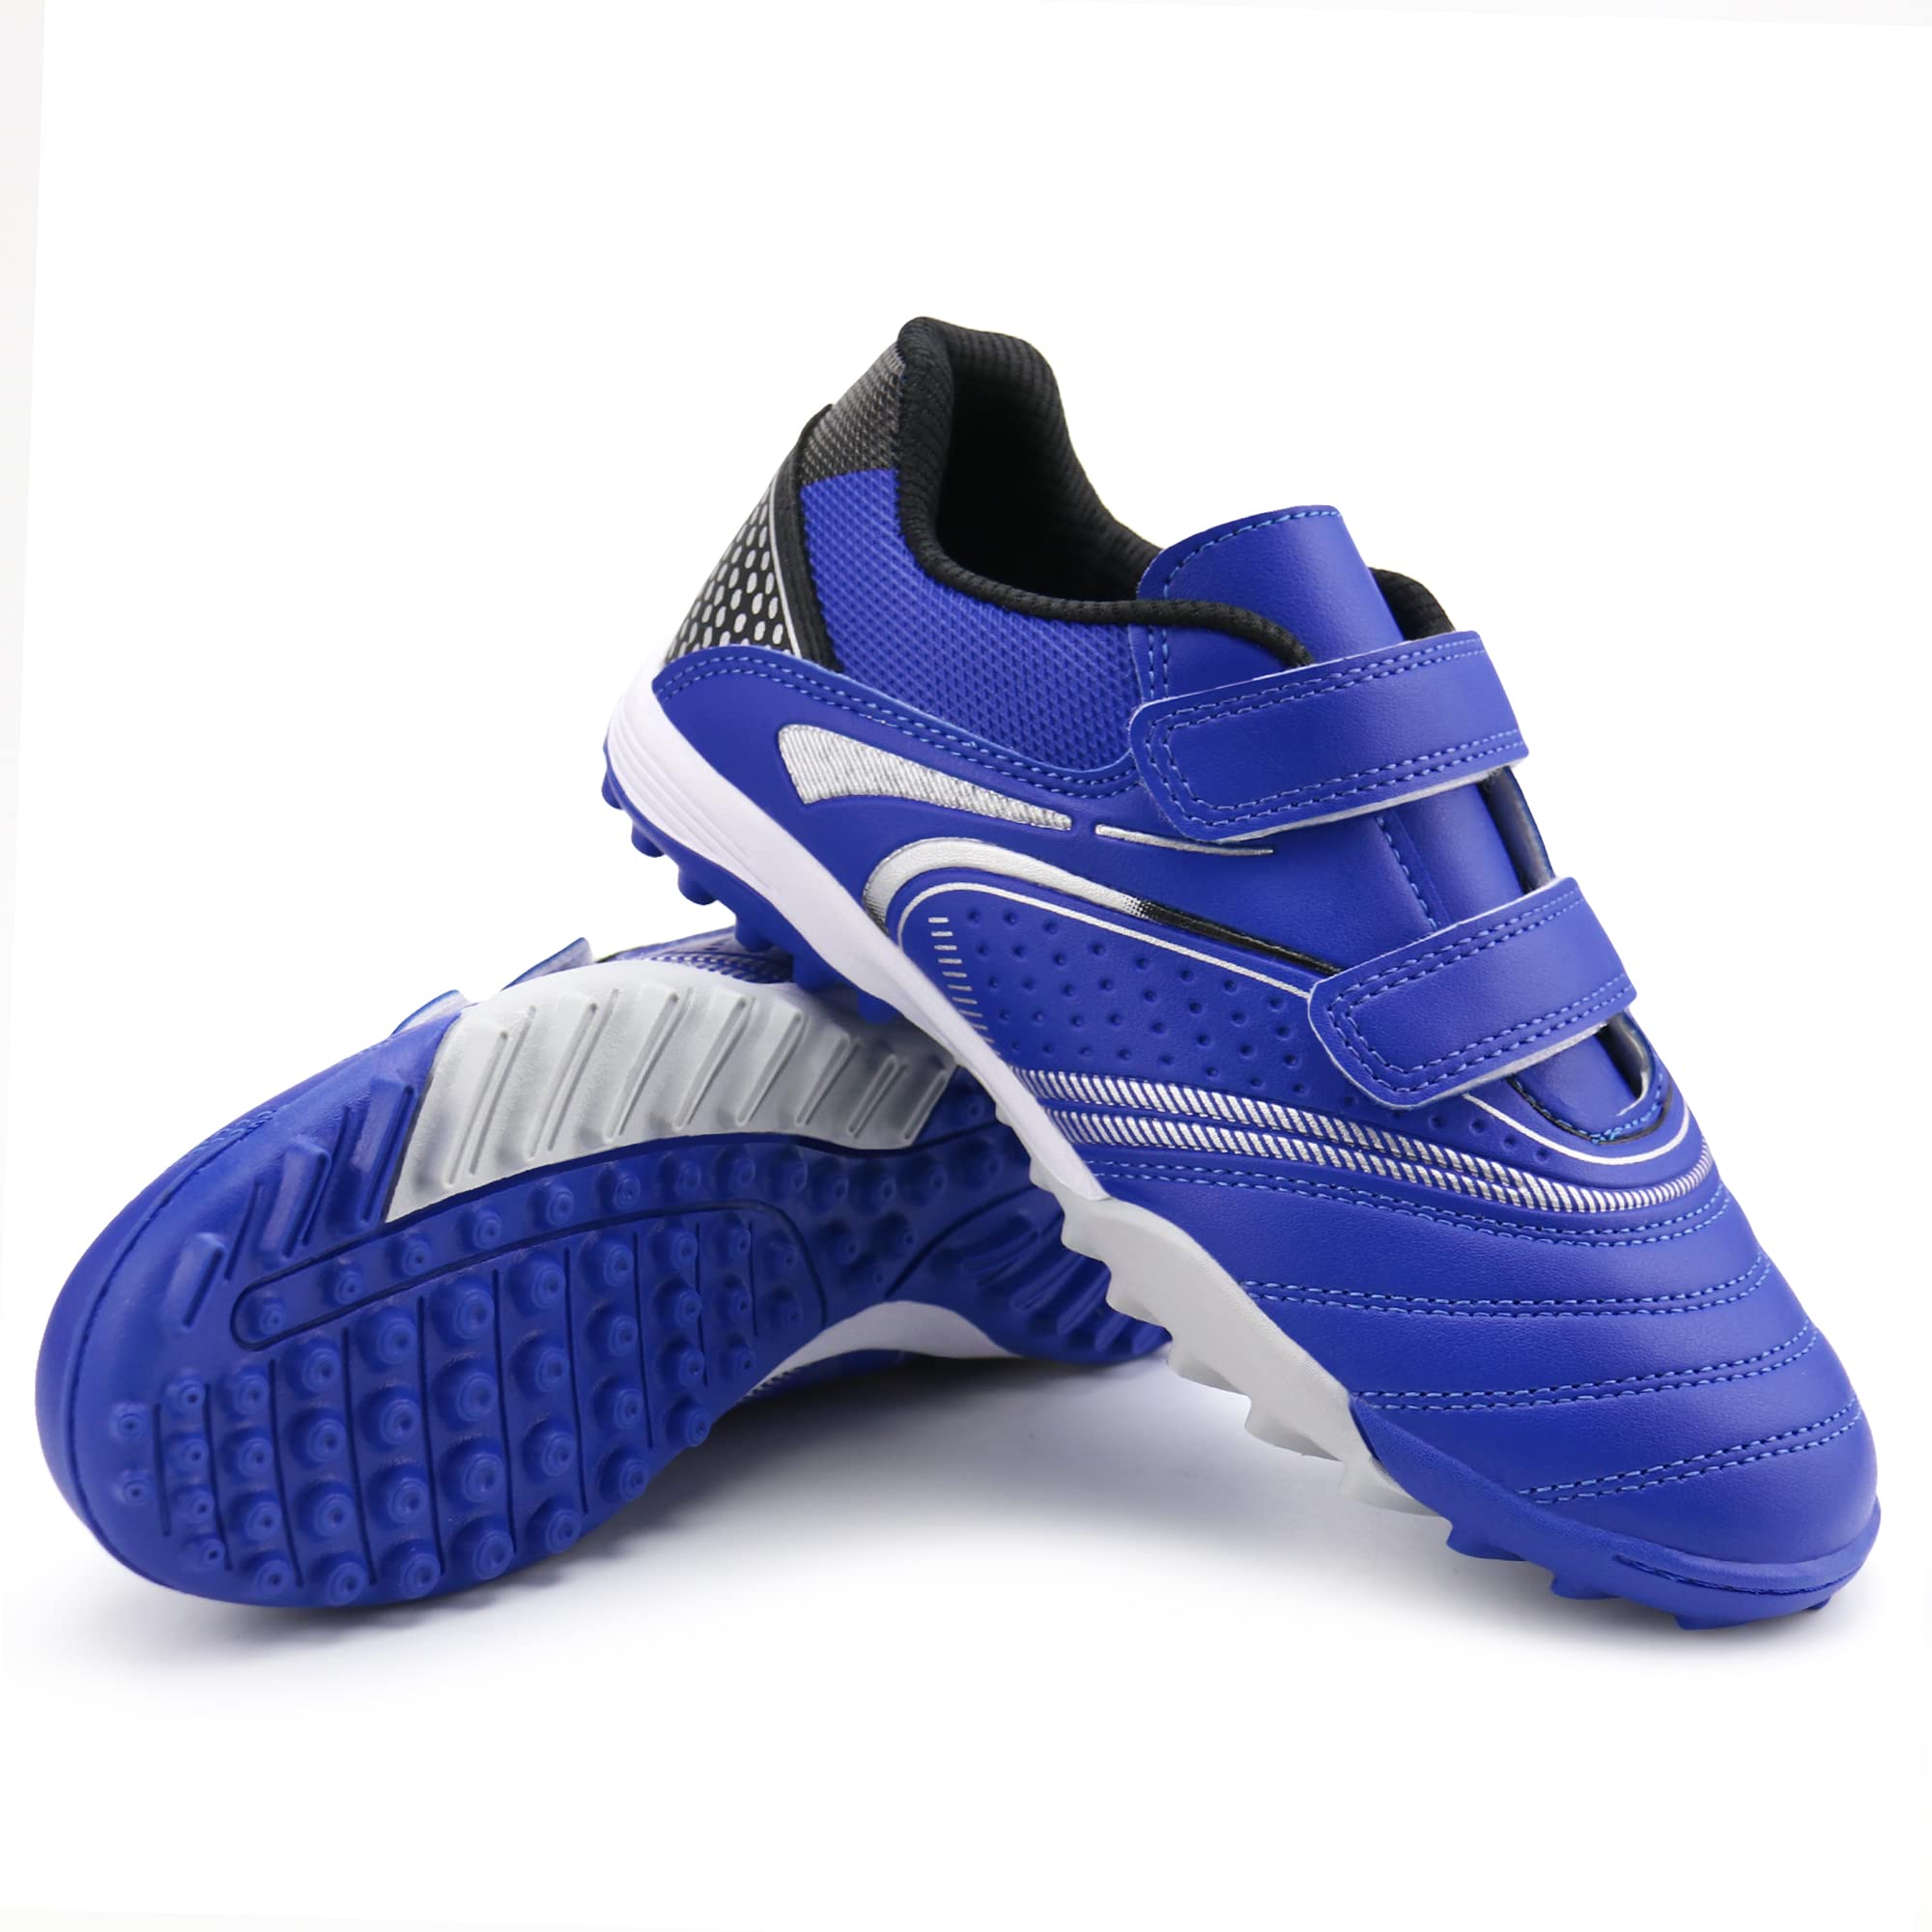 firelli Kids Athletic Indoor Soccer Cleats Boys Girls Comfortable Football Shoes